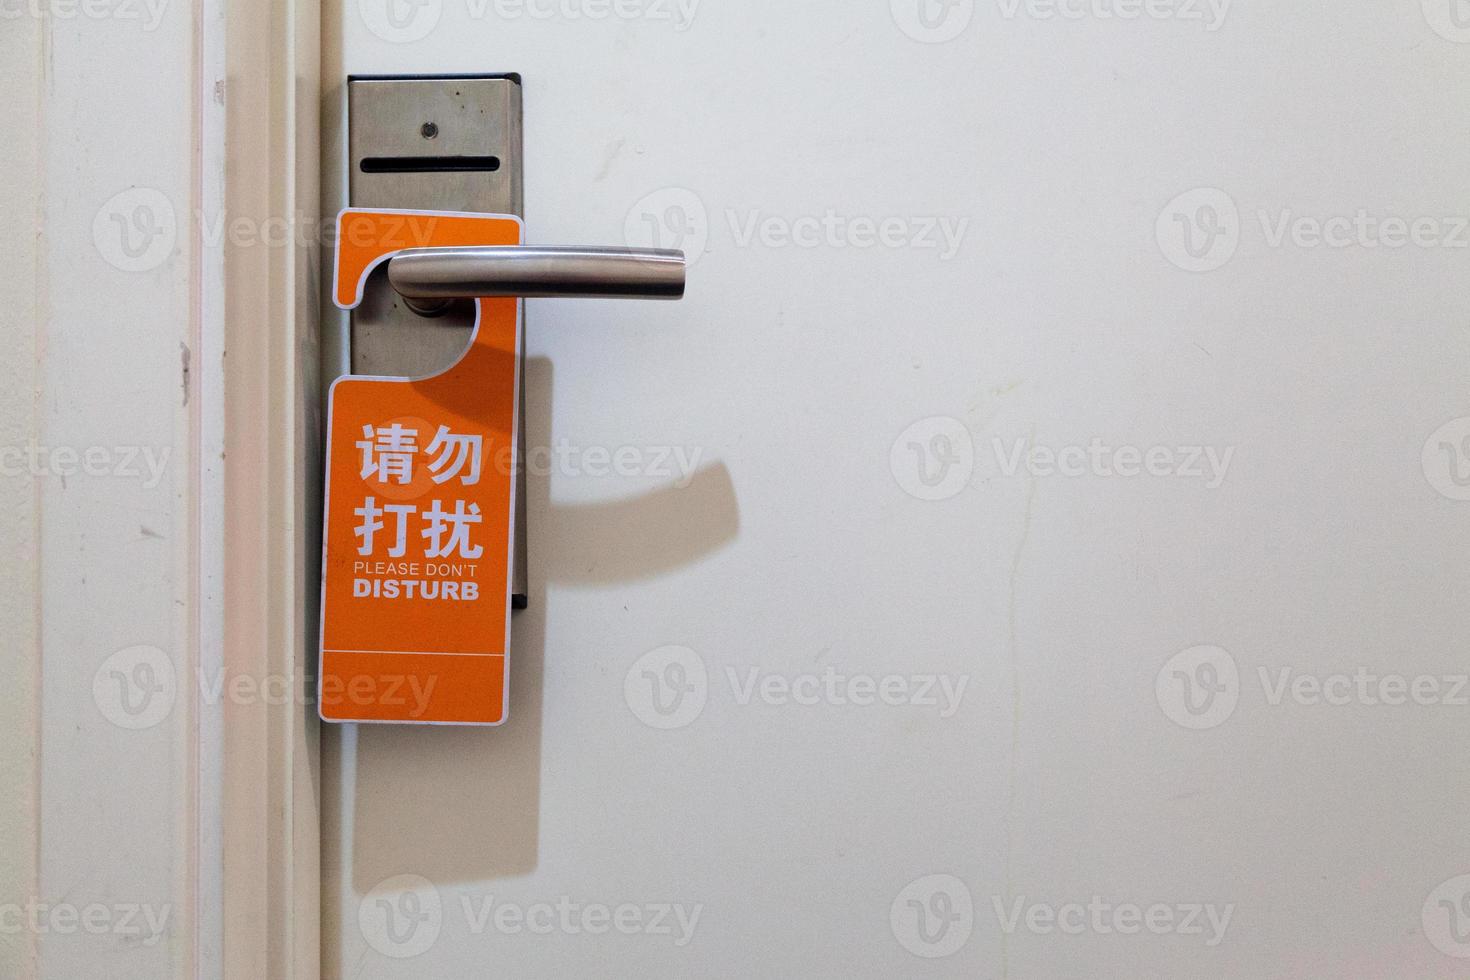 Please don't disturb sign in 2 languages photo